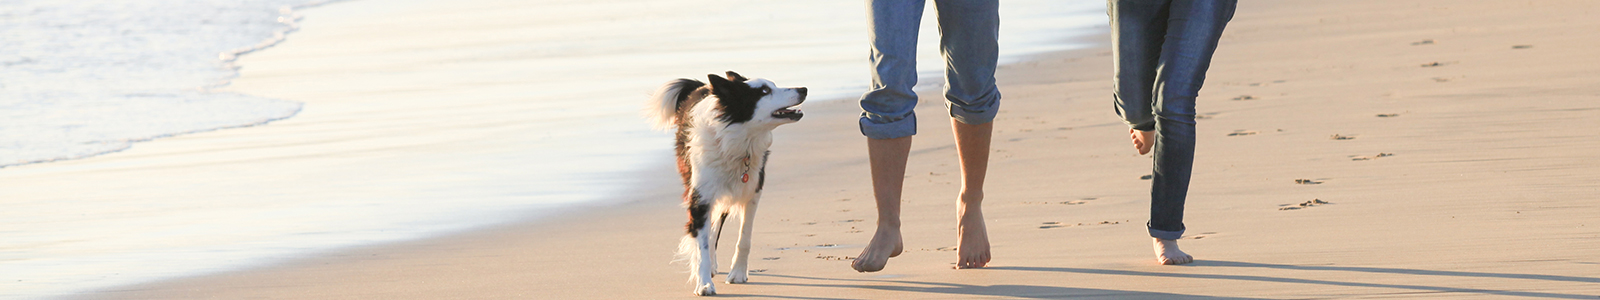 Find the perfect dog walk on your journey - Driving with Dogs